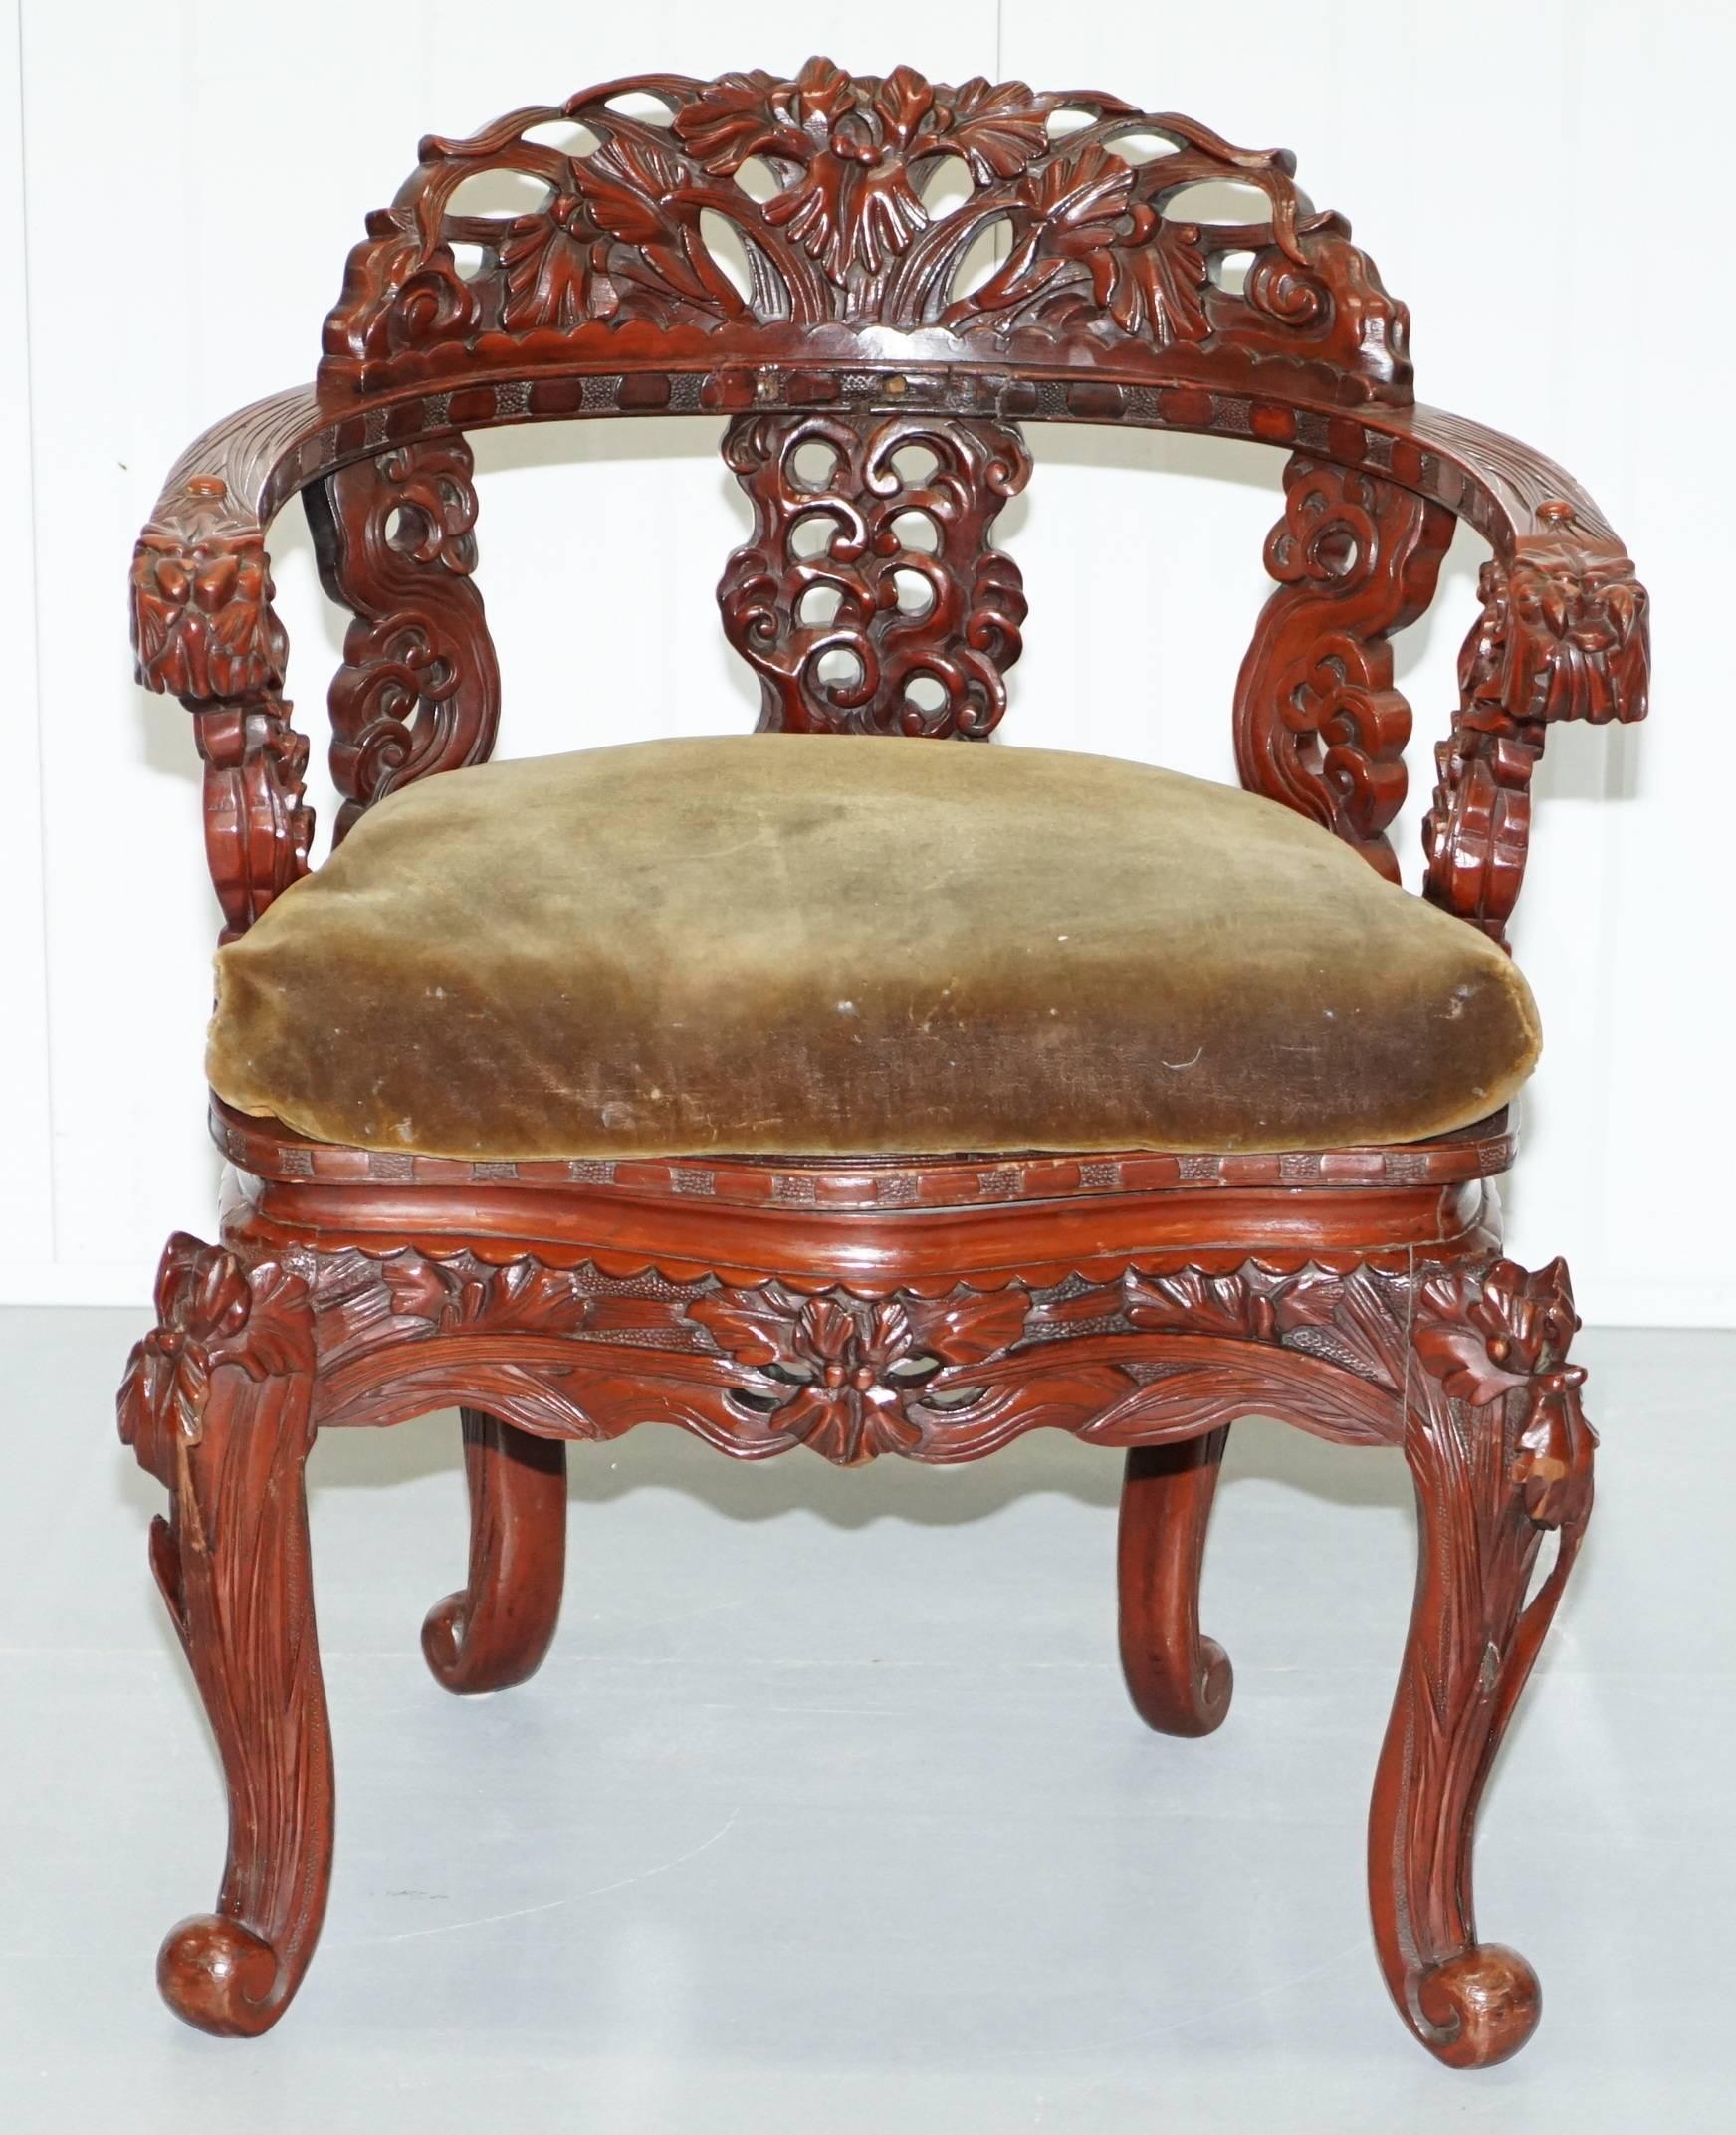 We are delighted to offer for sale this stunning hand-carved solid elm lacquered throne armchair

A really rare an expertly hand-carved piece, the detail is never ending and of the highest standard, there are many variations of these chairs, they